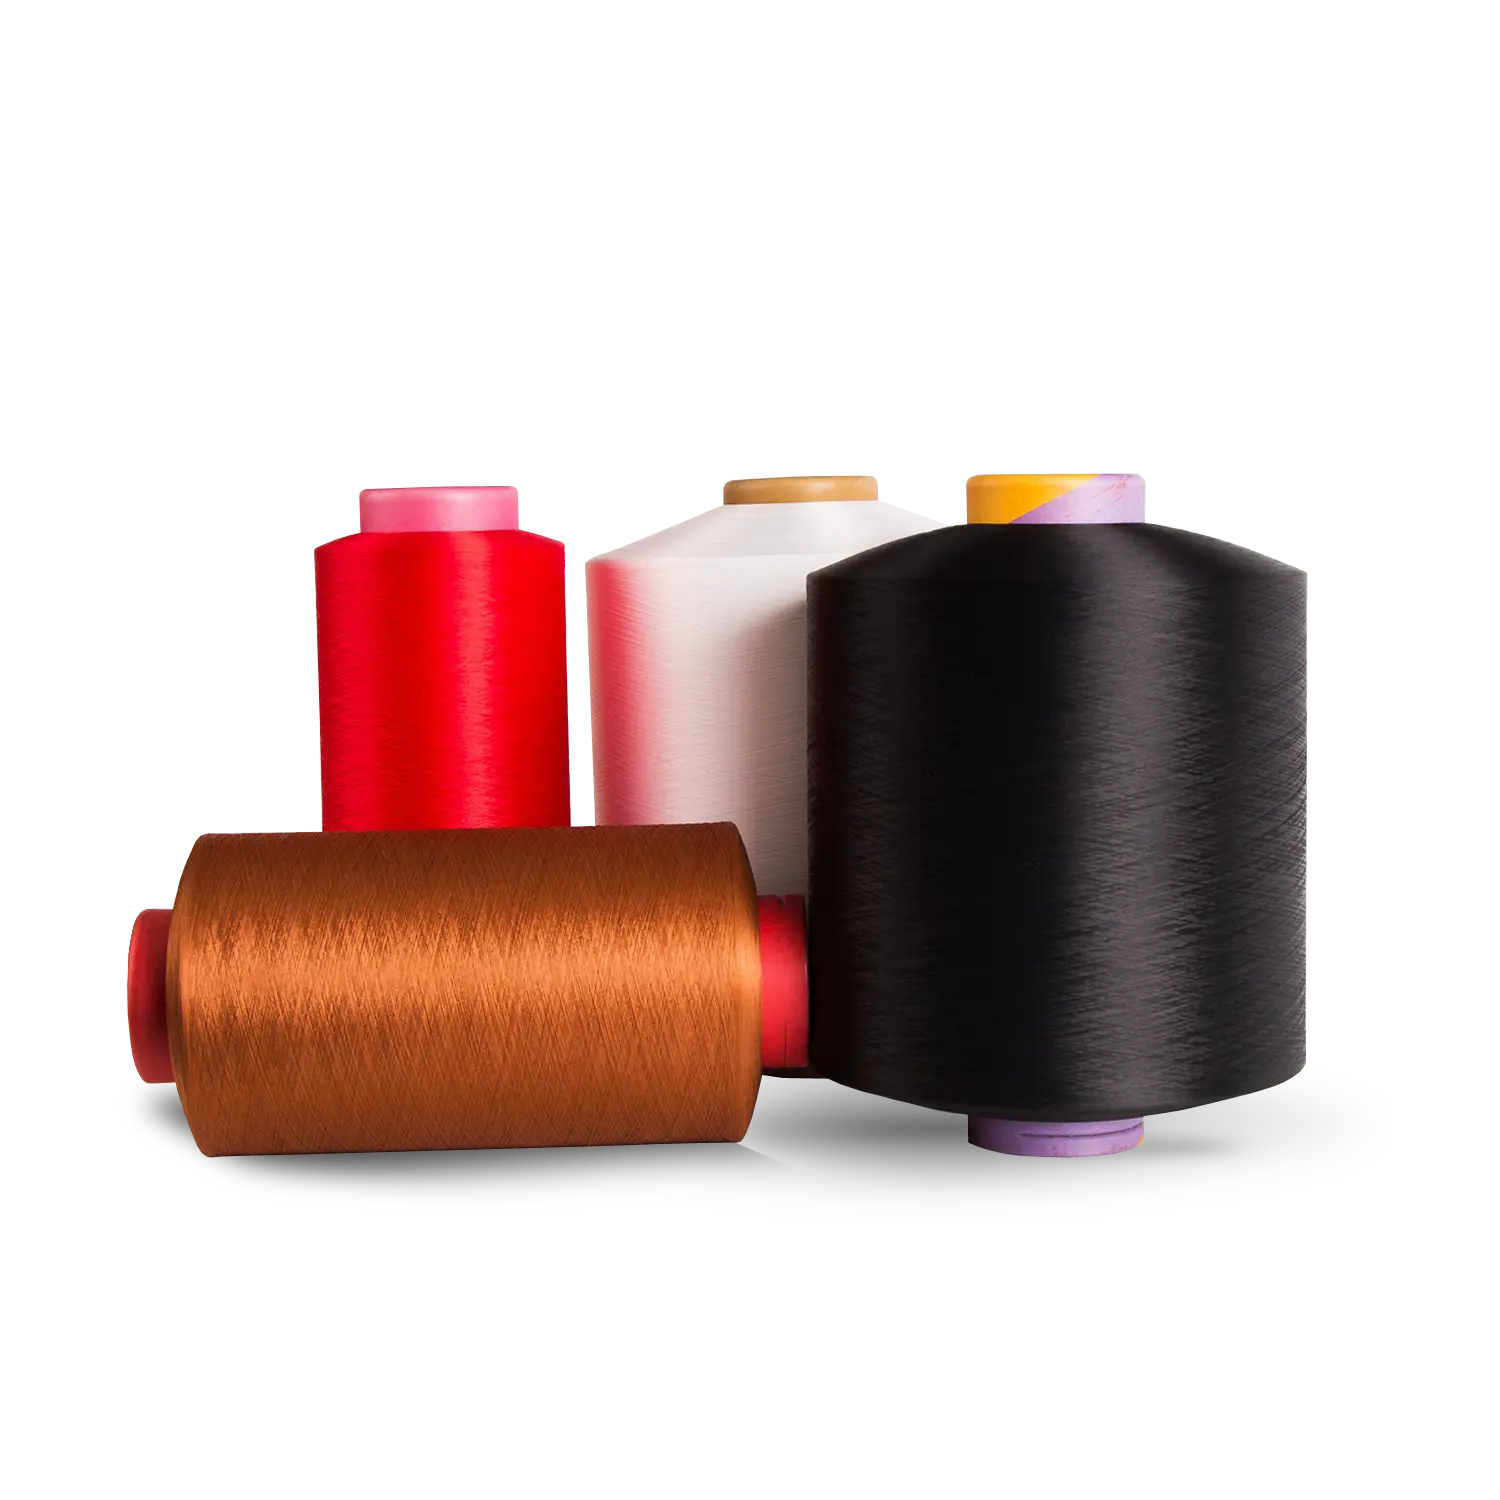 100% Polyester AA Garde Brand Recrone Flat Knitting Yarn Freshly Dye-Dyed Strong & Recycled Twisted Yarn 150/2 Size on Demand